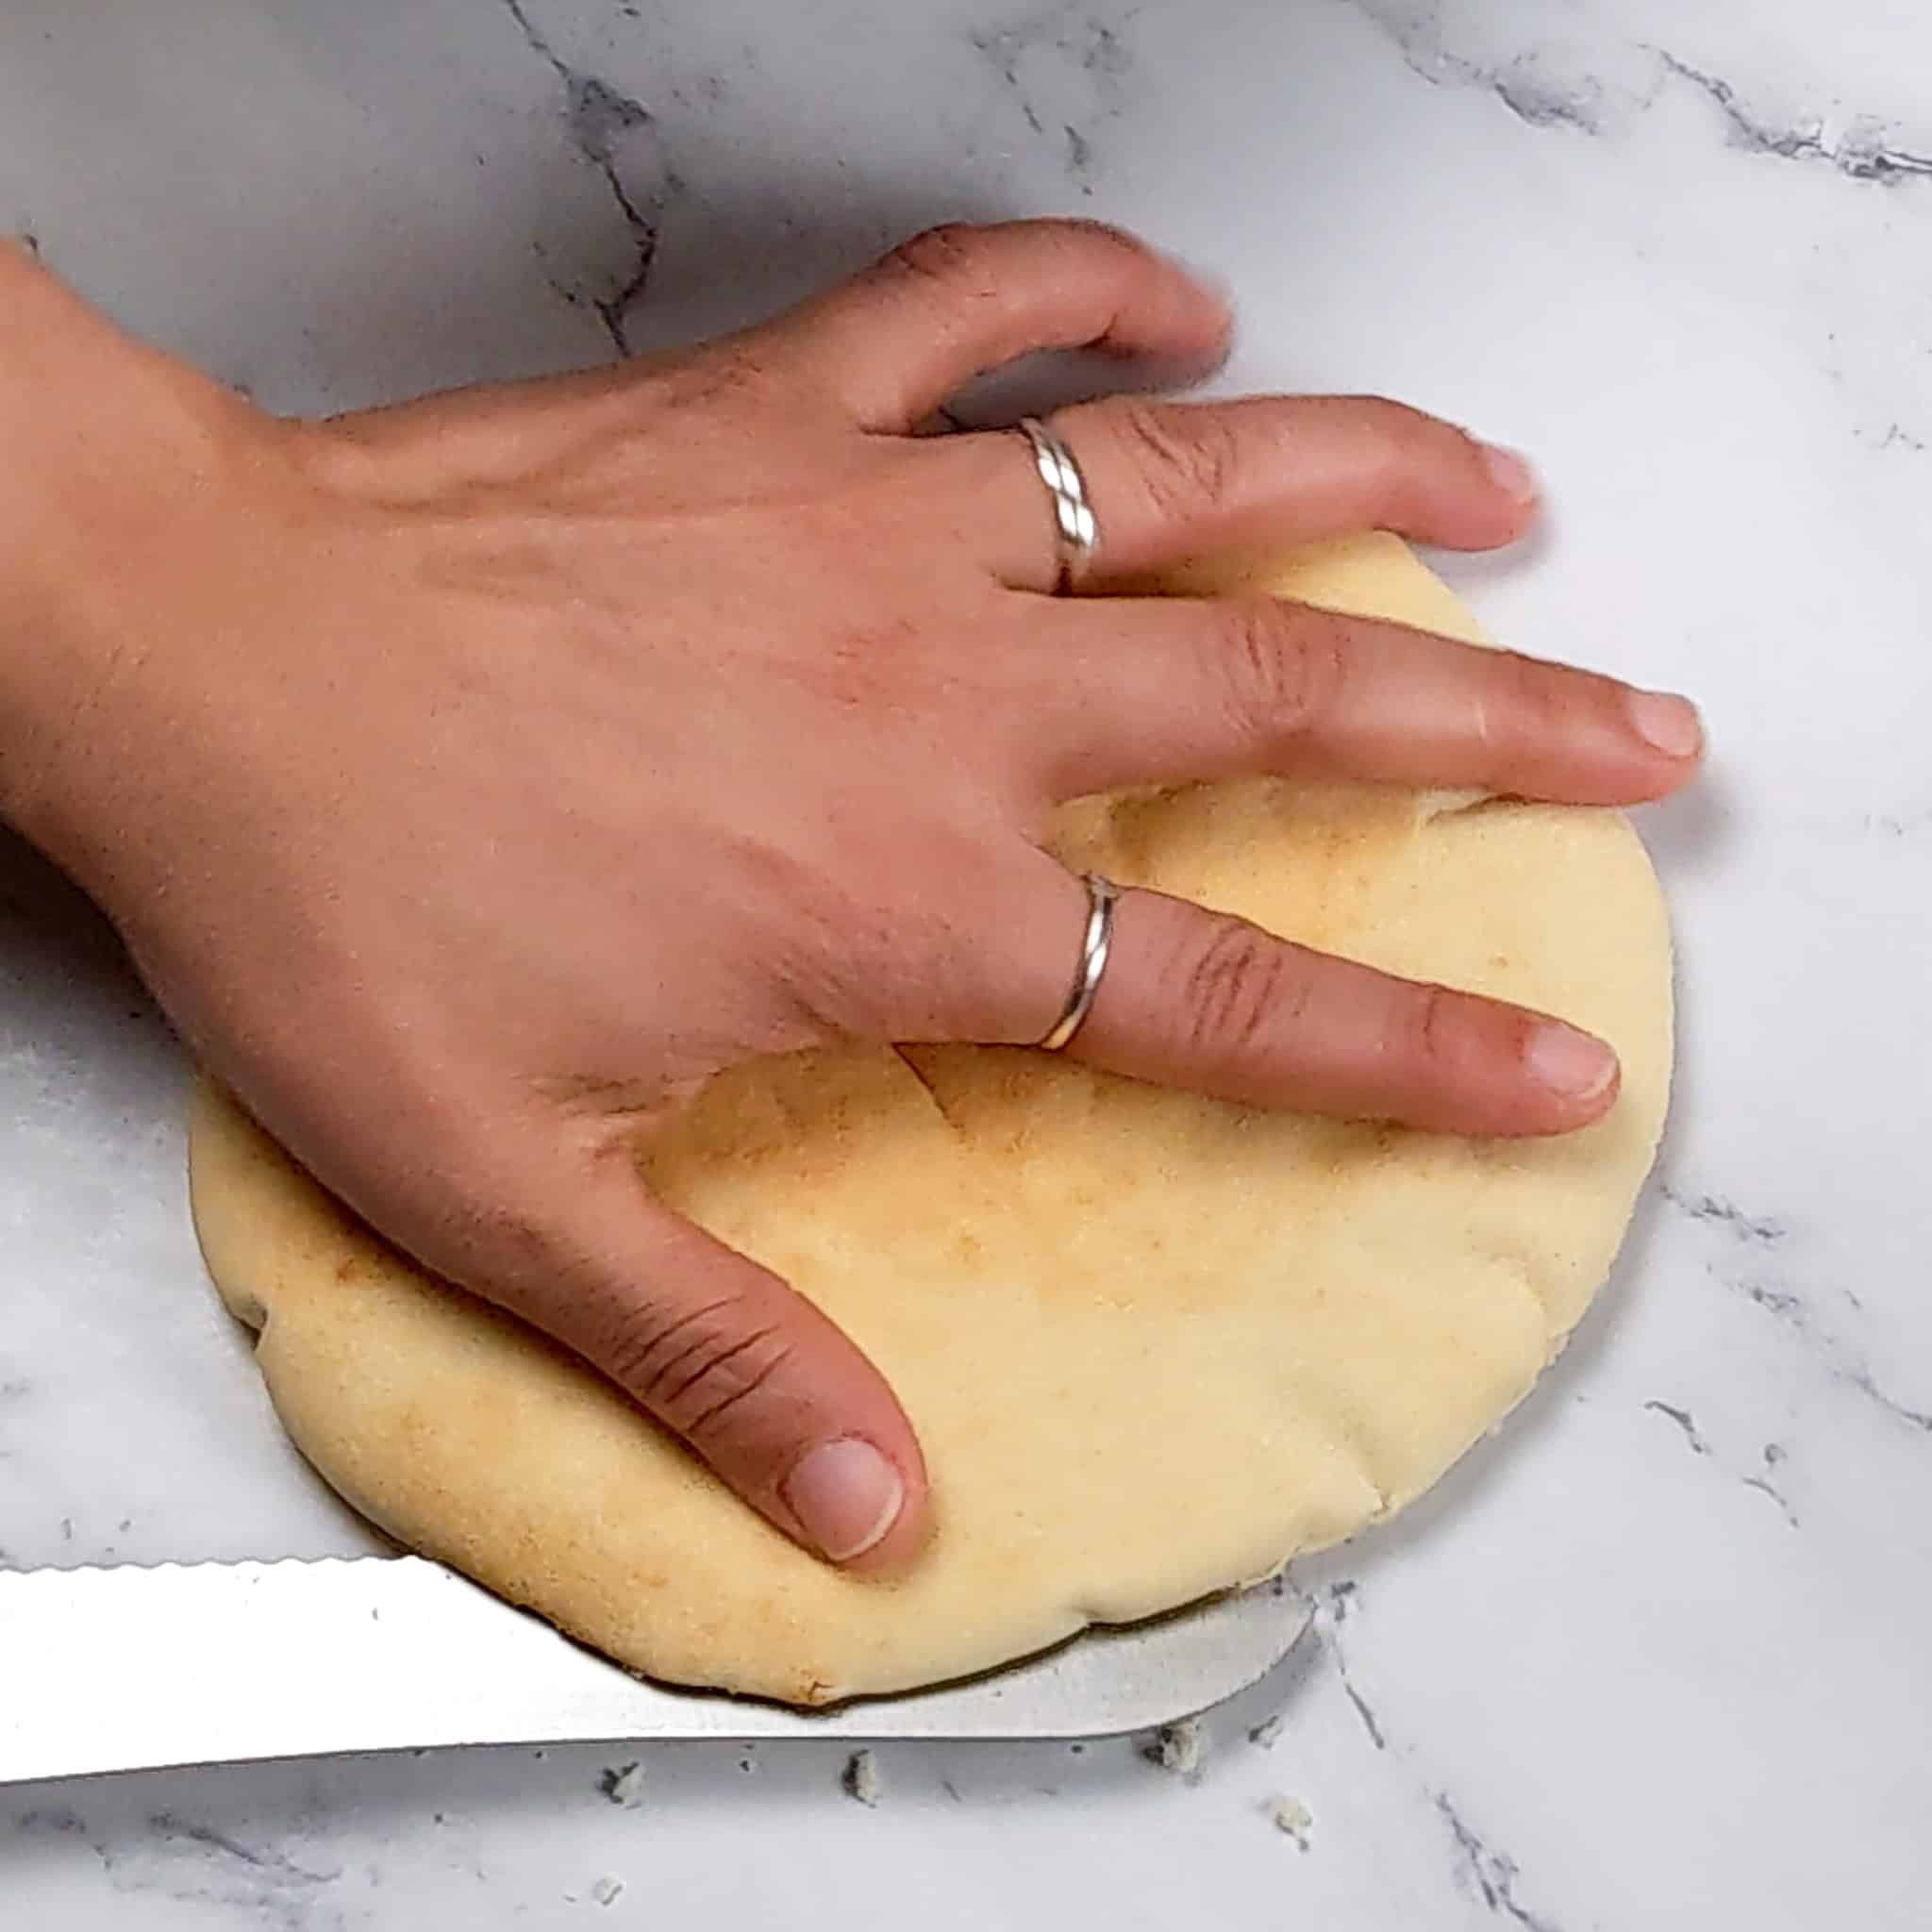 one pita bread being spit into halves with a bread knife.